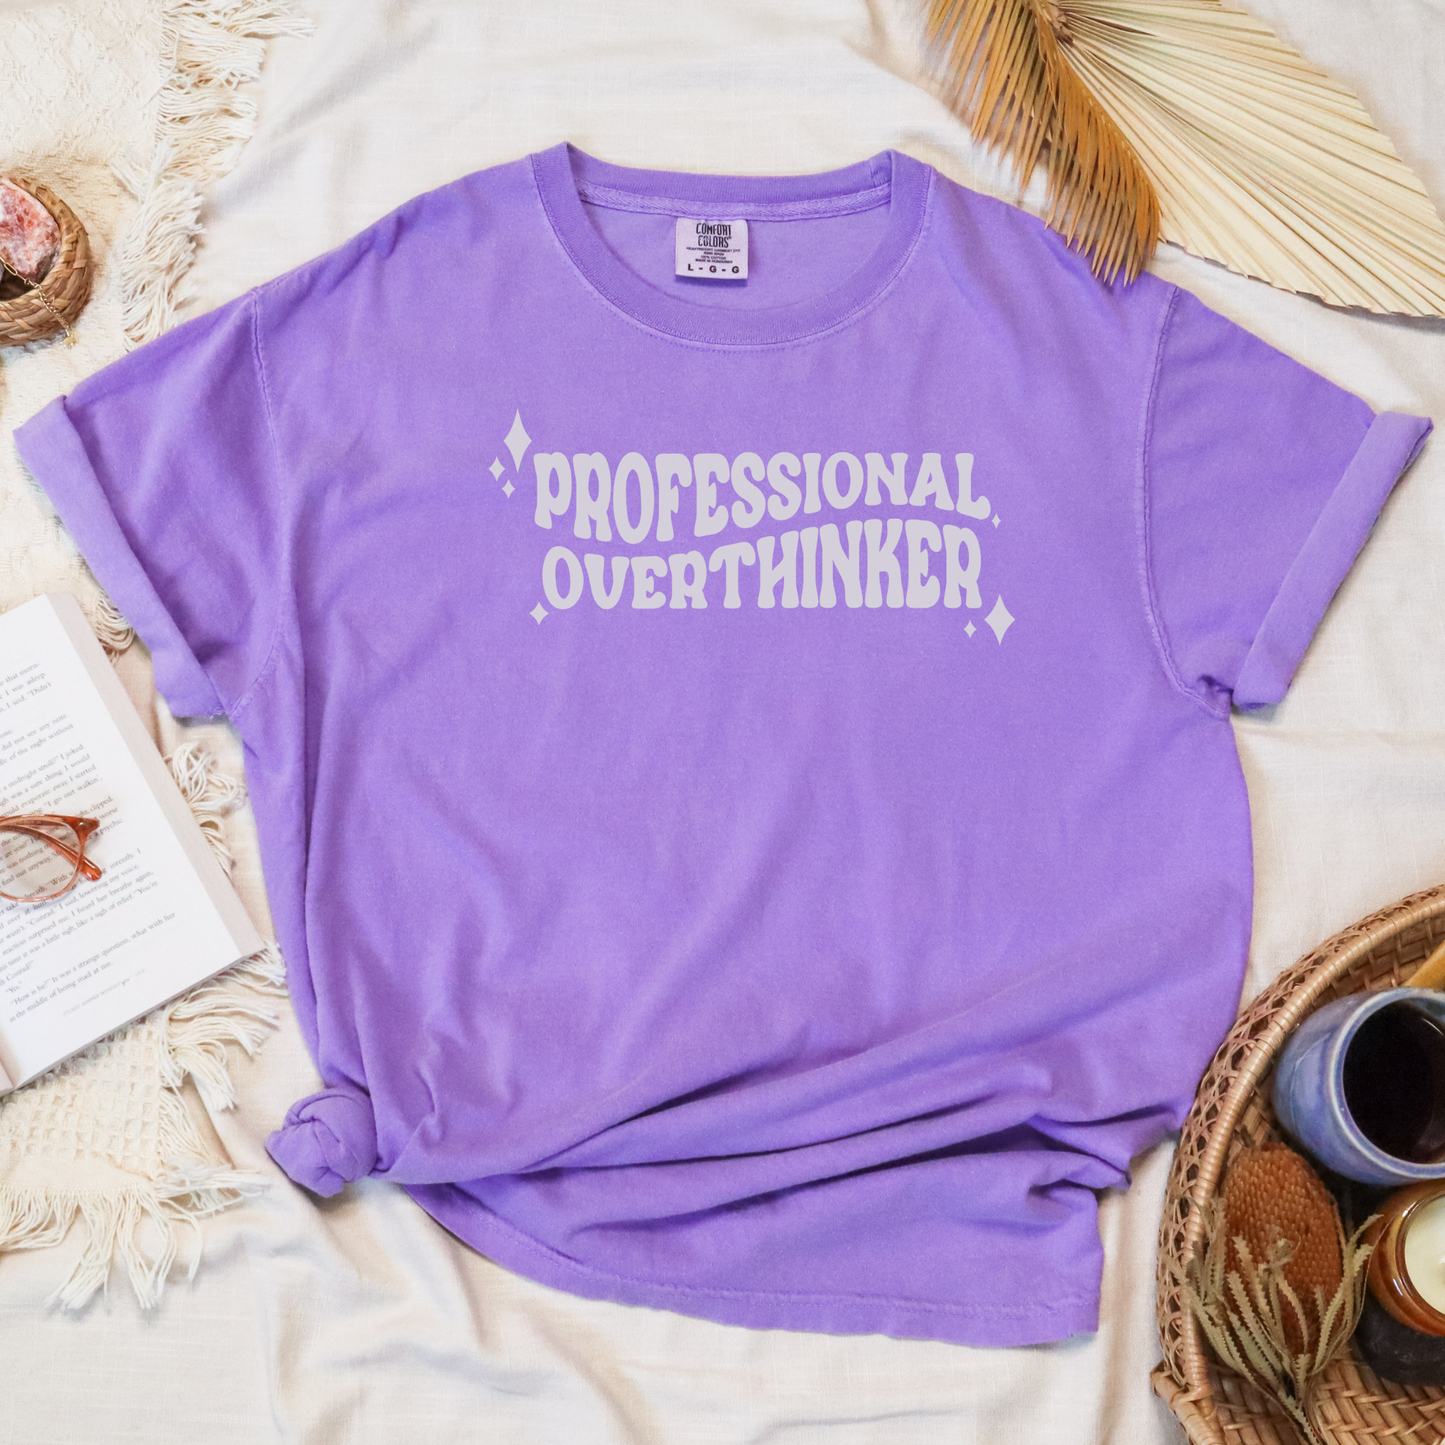 Professional Over Thinker Anxiety TShirt, Sarcastic Funny Graphic Shirt, Funny Gift, Mental Health Awareness, Positive Thoughts, Self Care